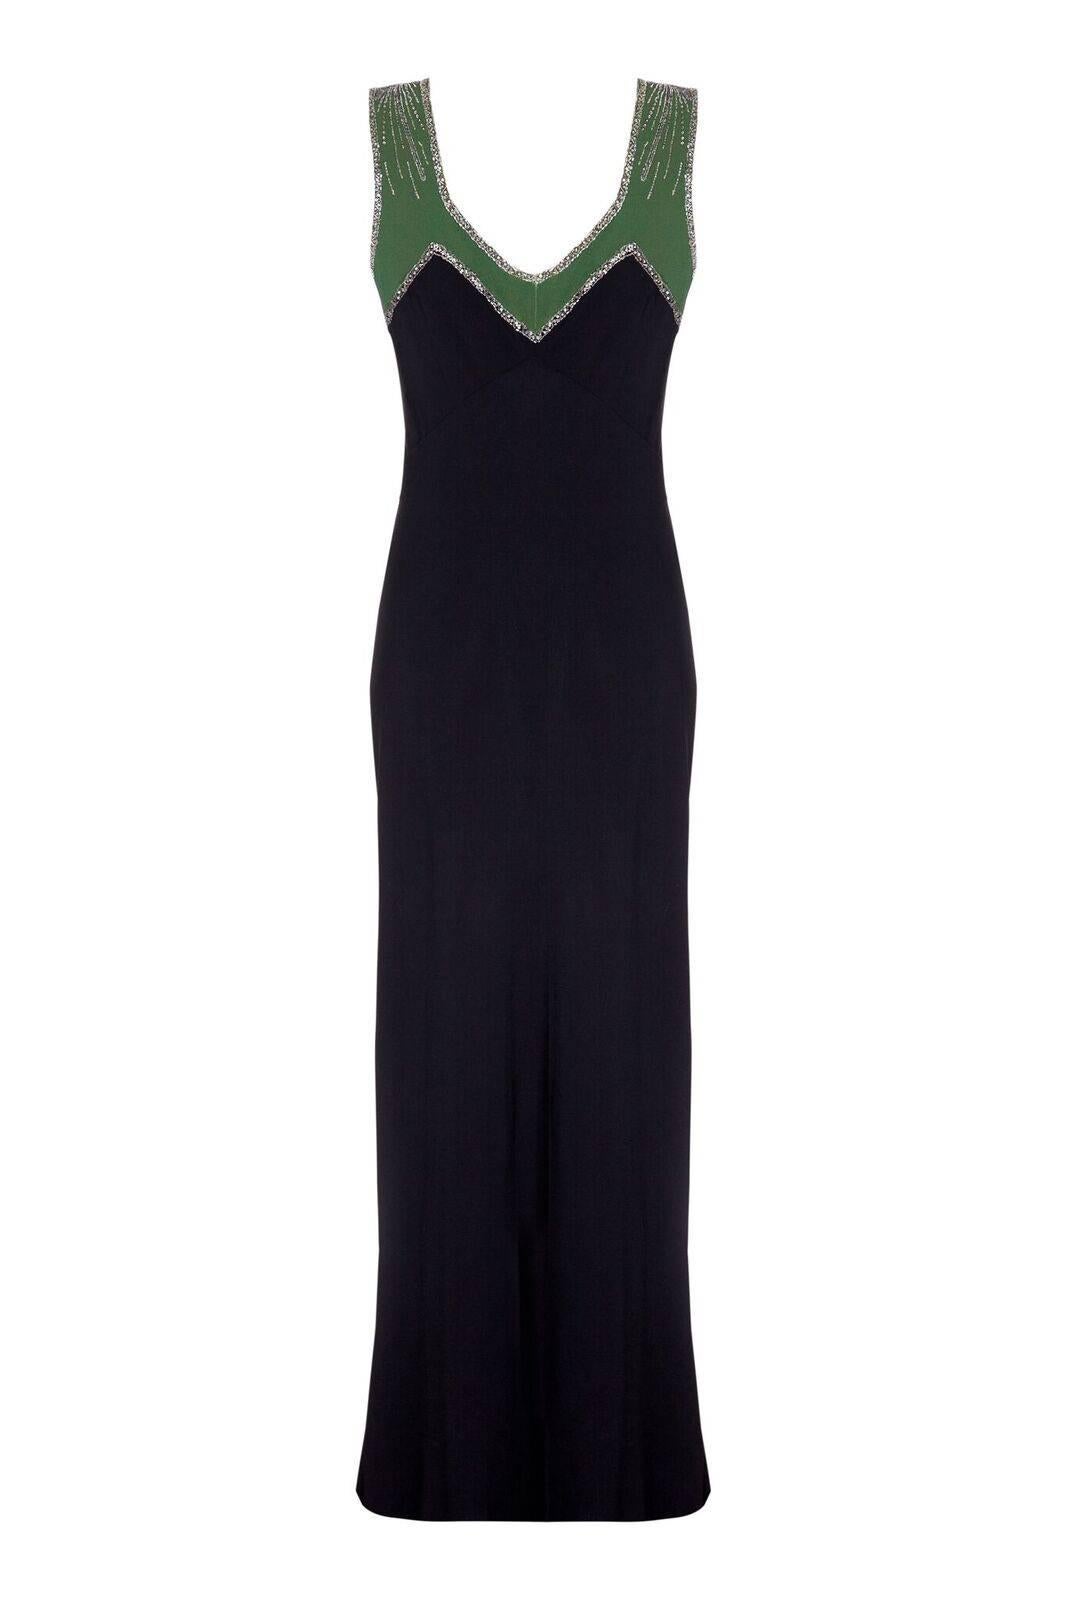 This sensational 1930s Art Deco evening gown boasts the winning combination of elegant line and exquisite embellishment. The silk crepe fabric is predominantly black, with a panel of forest green artfully placed around the centre front and neckline